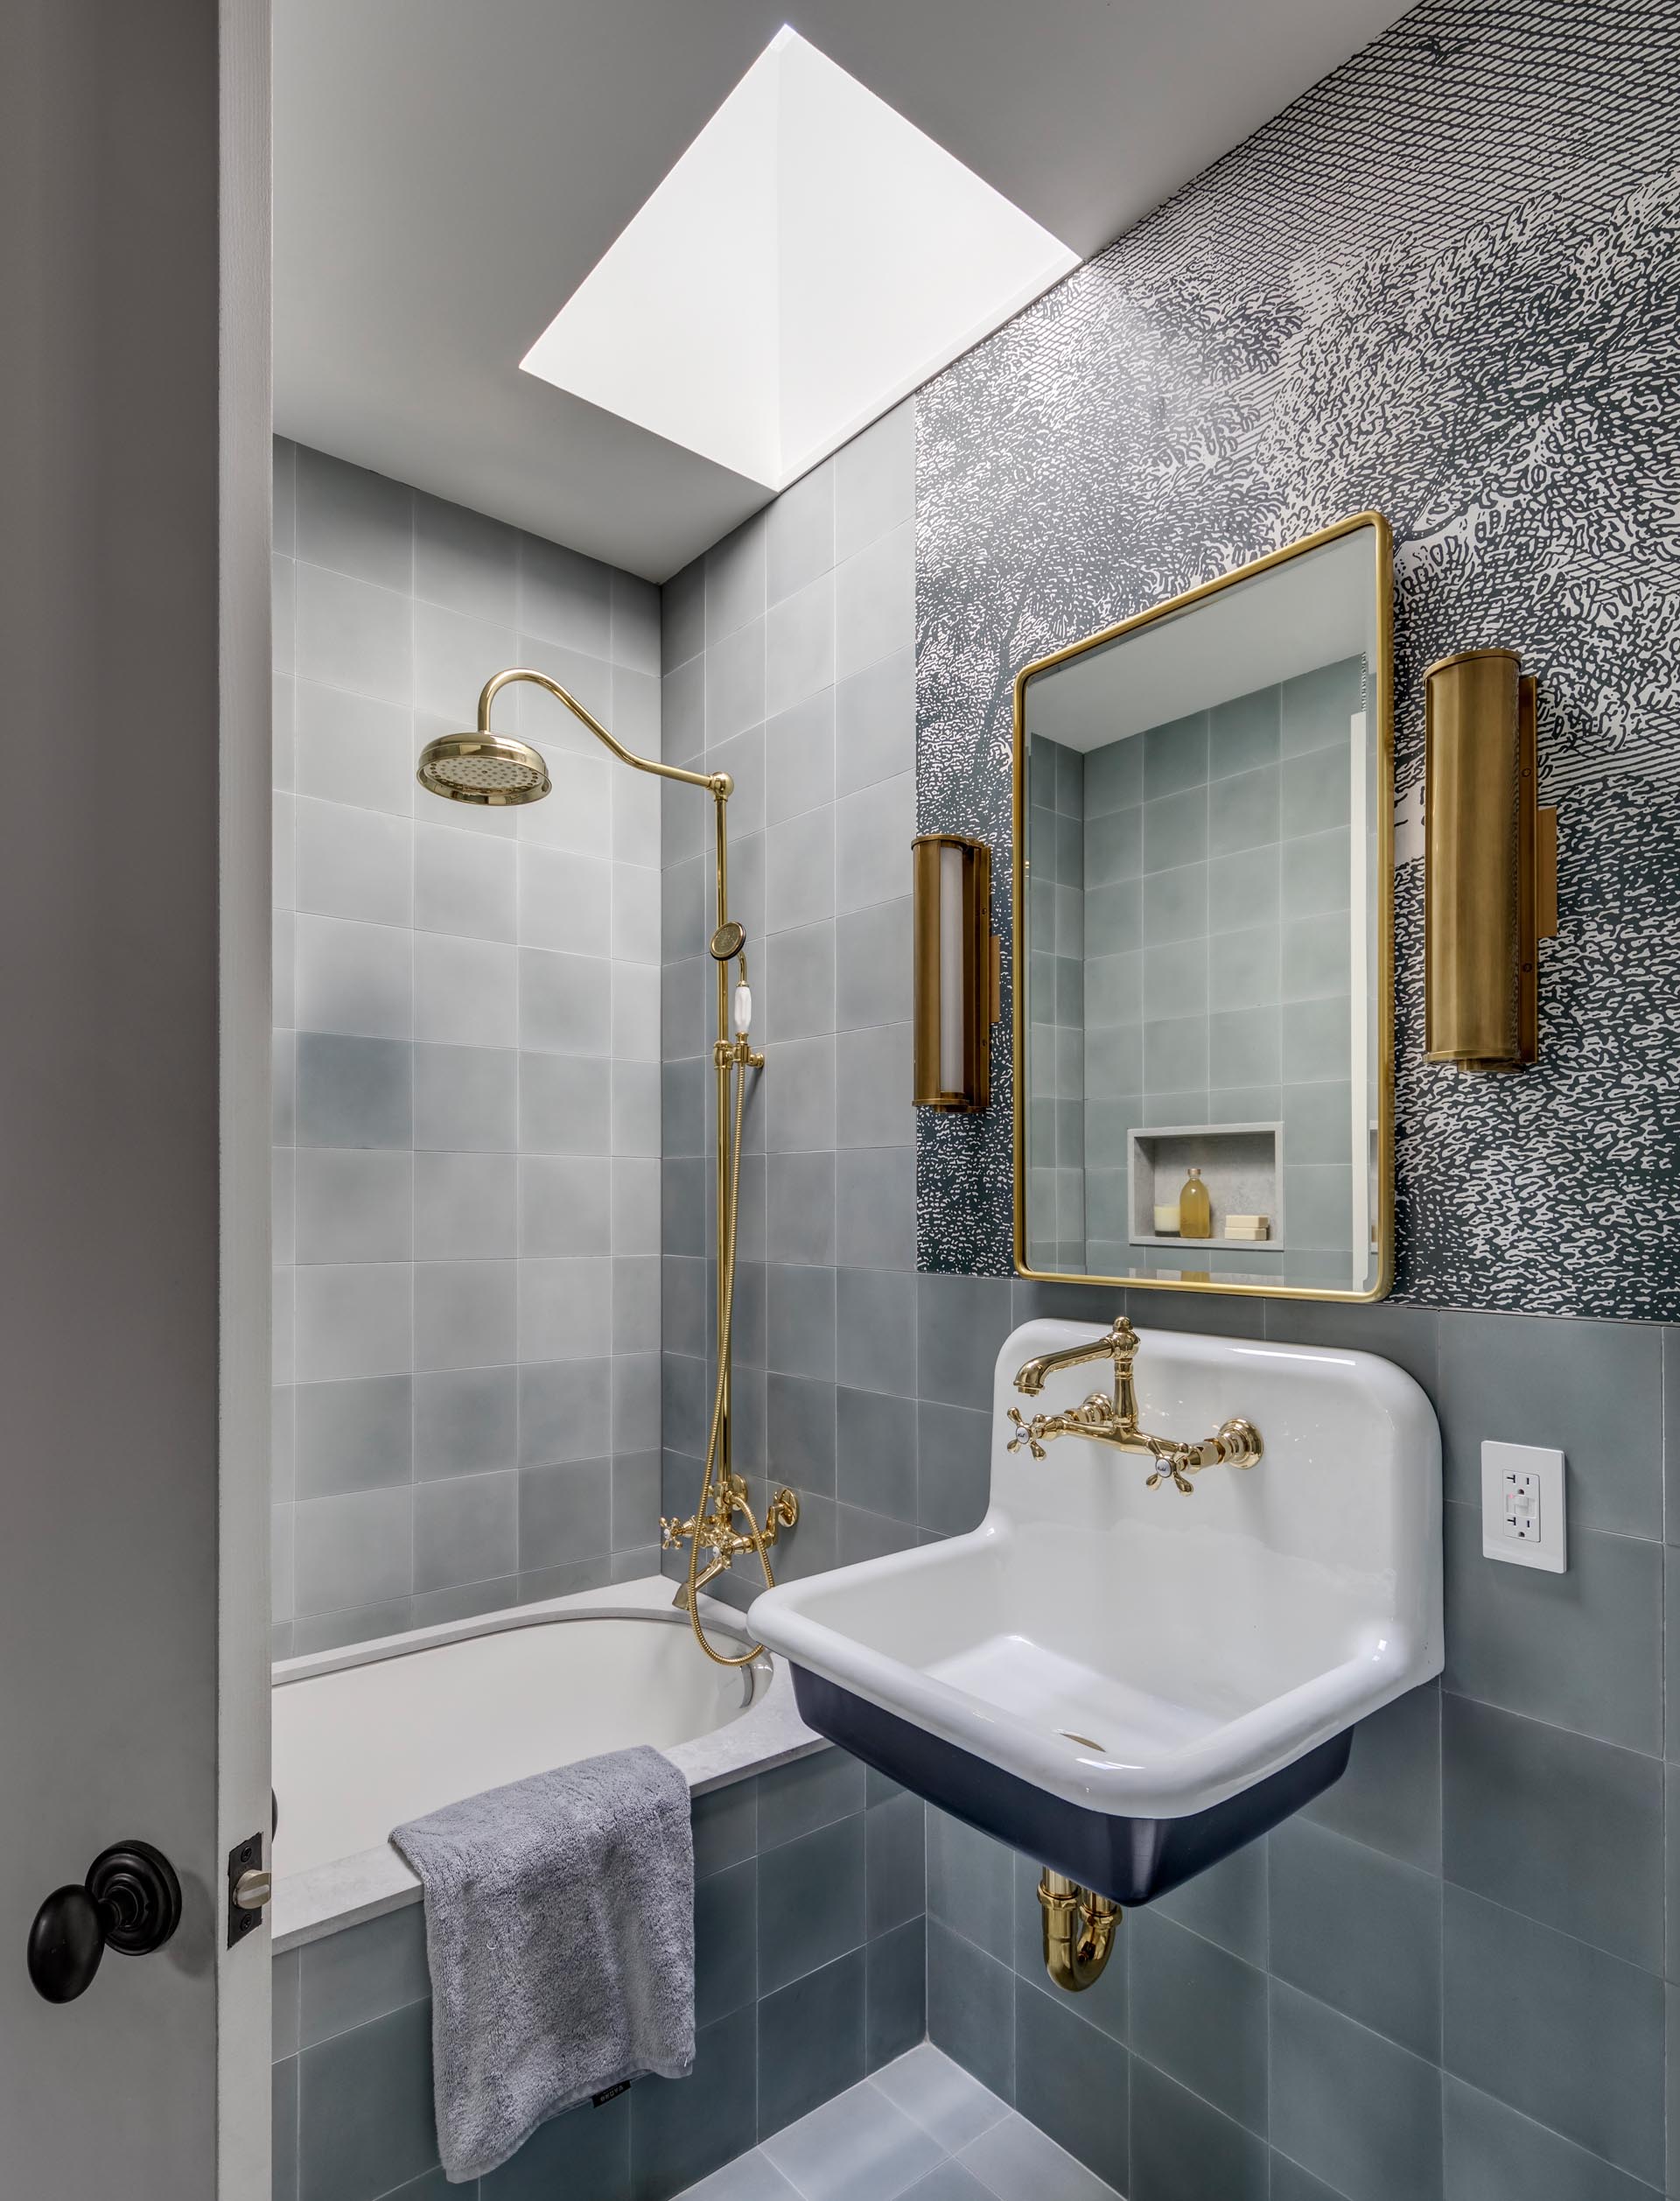 A bathroom with a floating vanity, gold hardware and faucet, and grey tiled walls and bathtub surround.